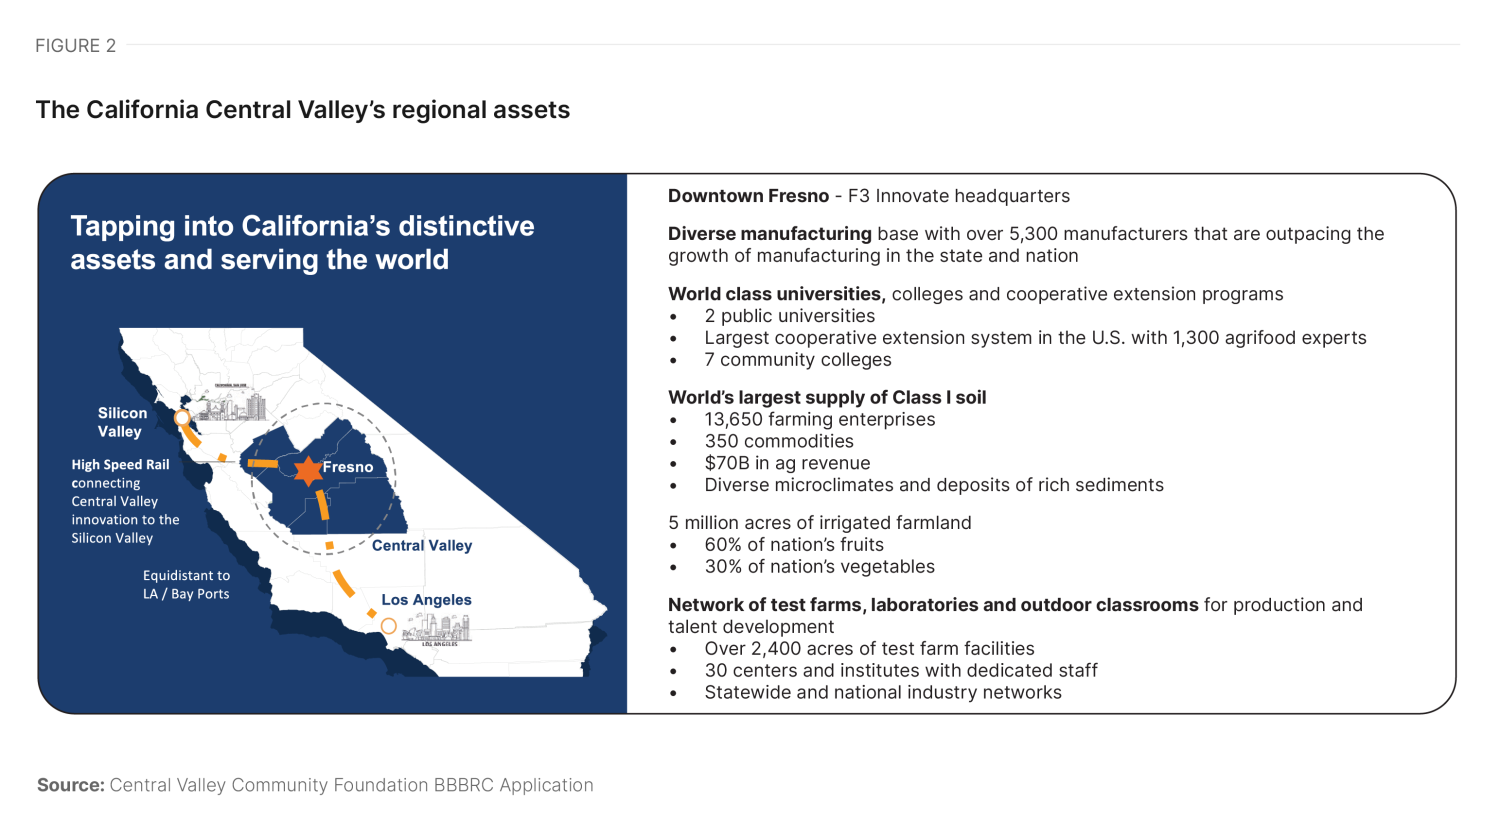 Figure 2. The California Central Valley’s regional assets